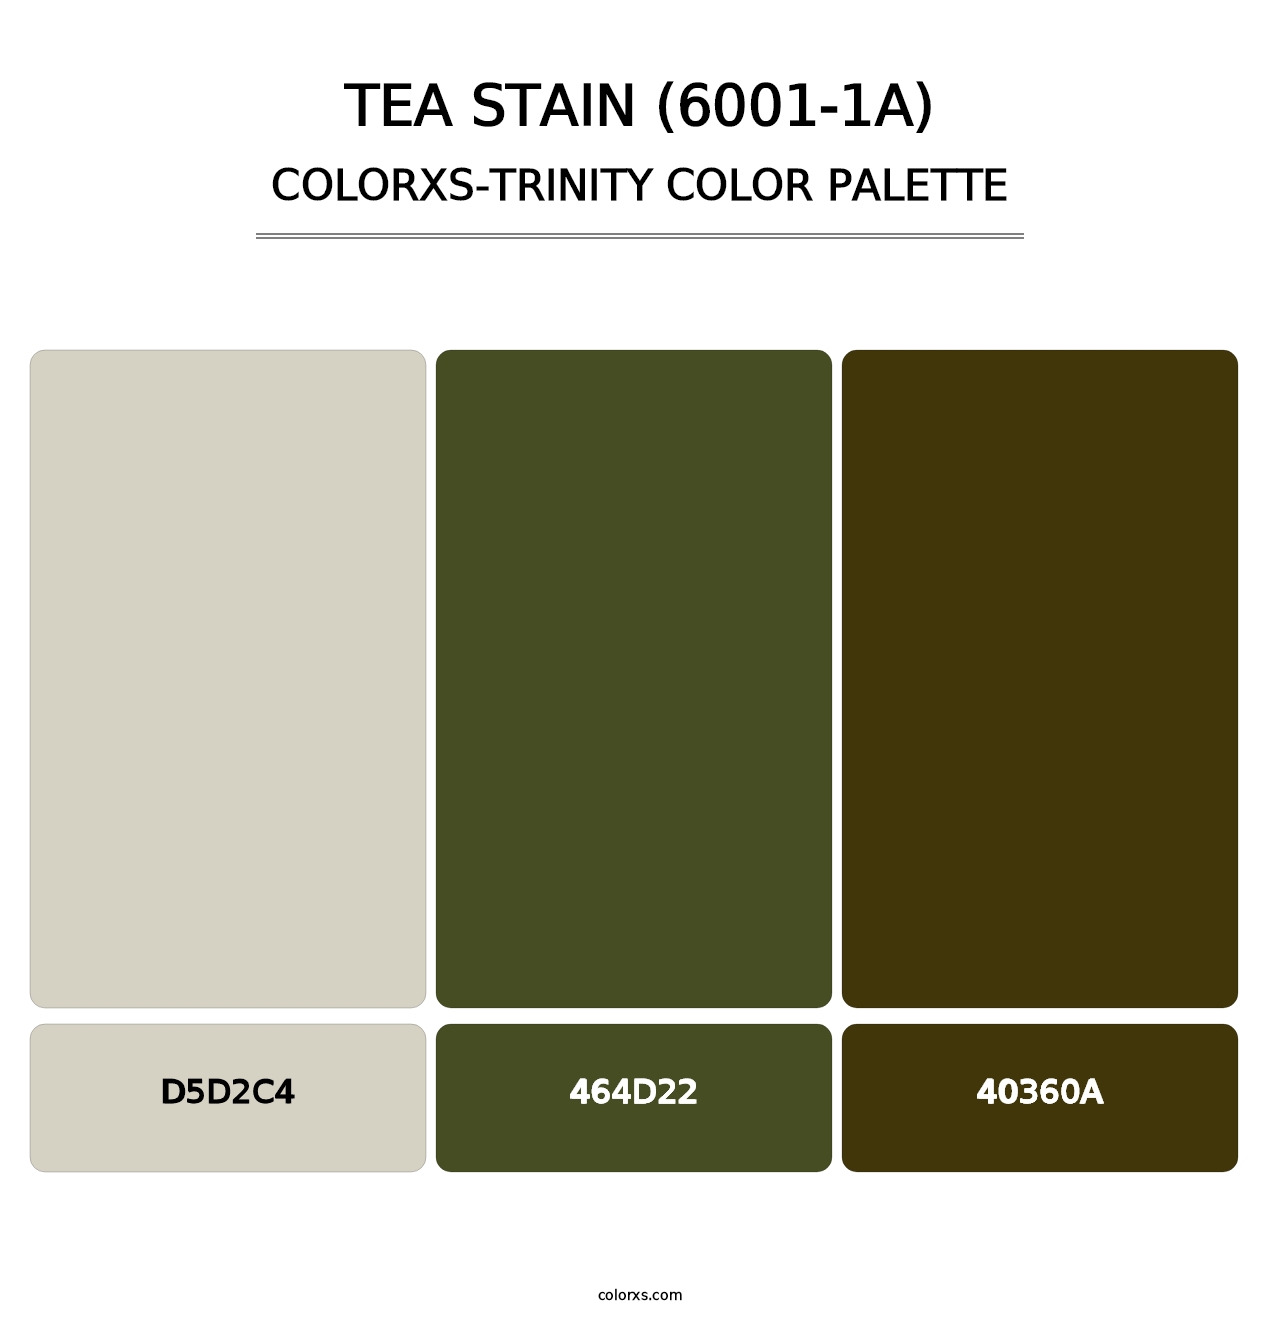 Tea Stain (6001-1A) - Colorxs Trinity Palette